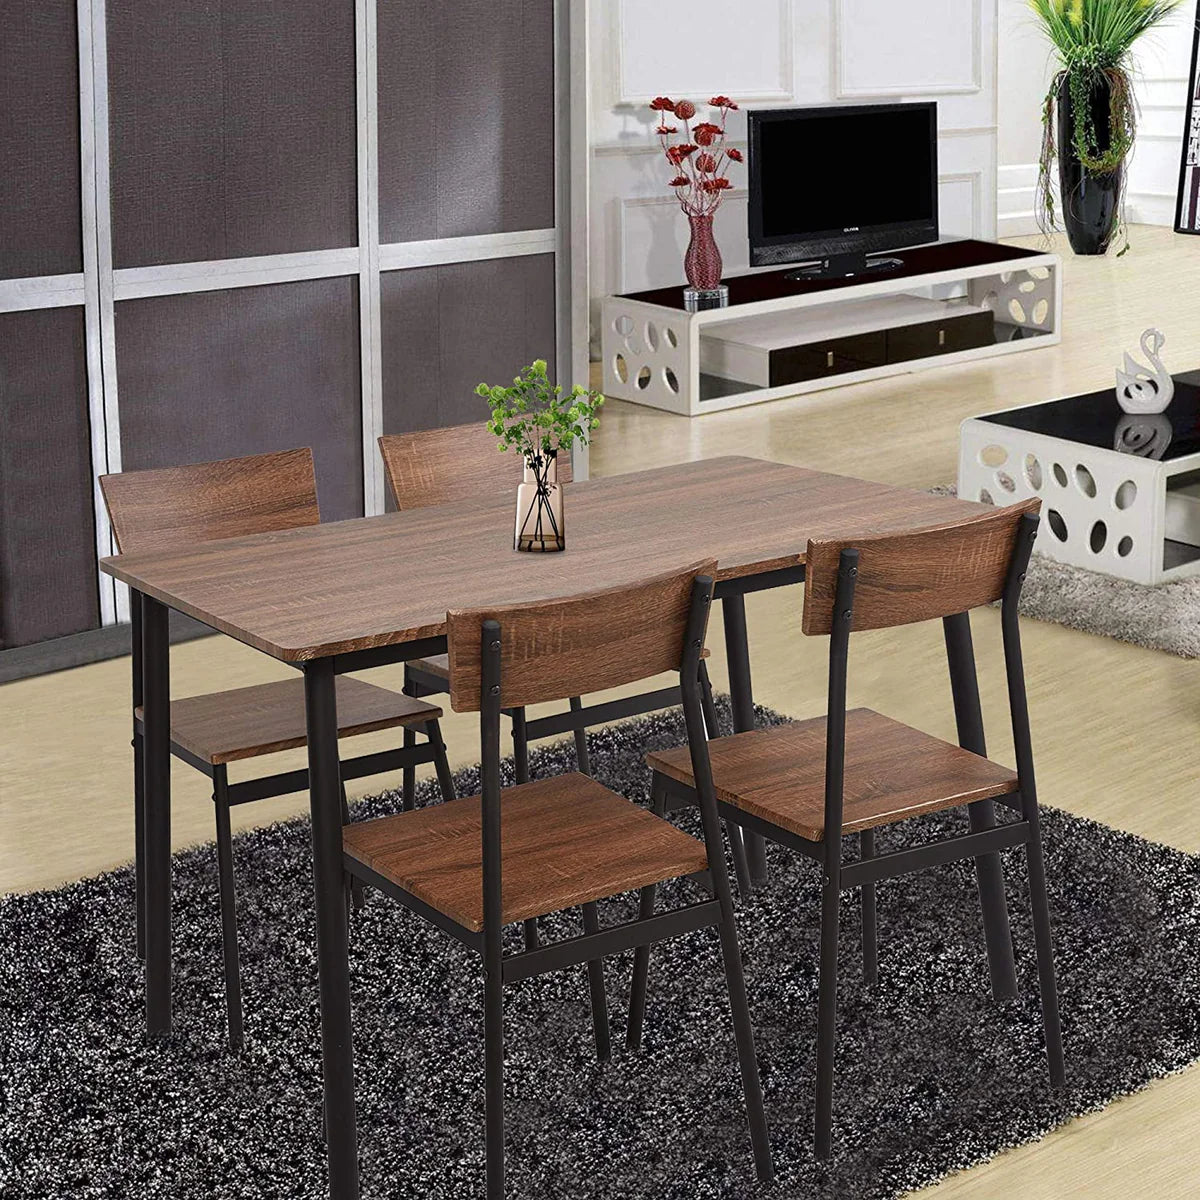 5 Piece Dining Table Set, 1 Dining Table 43.3" for 4 with 4 Dining Chairs Rustic Wooden Dinette, Wood Backrest